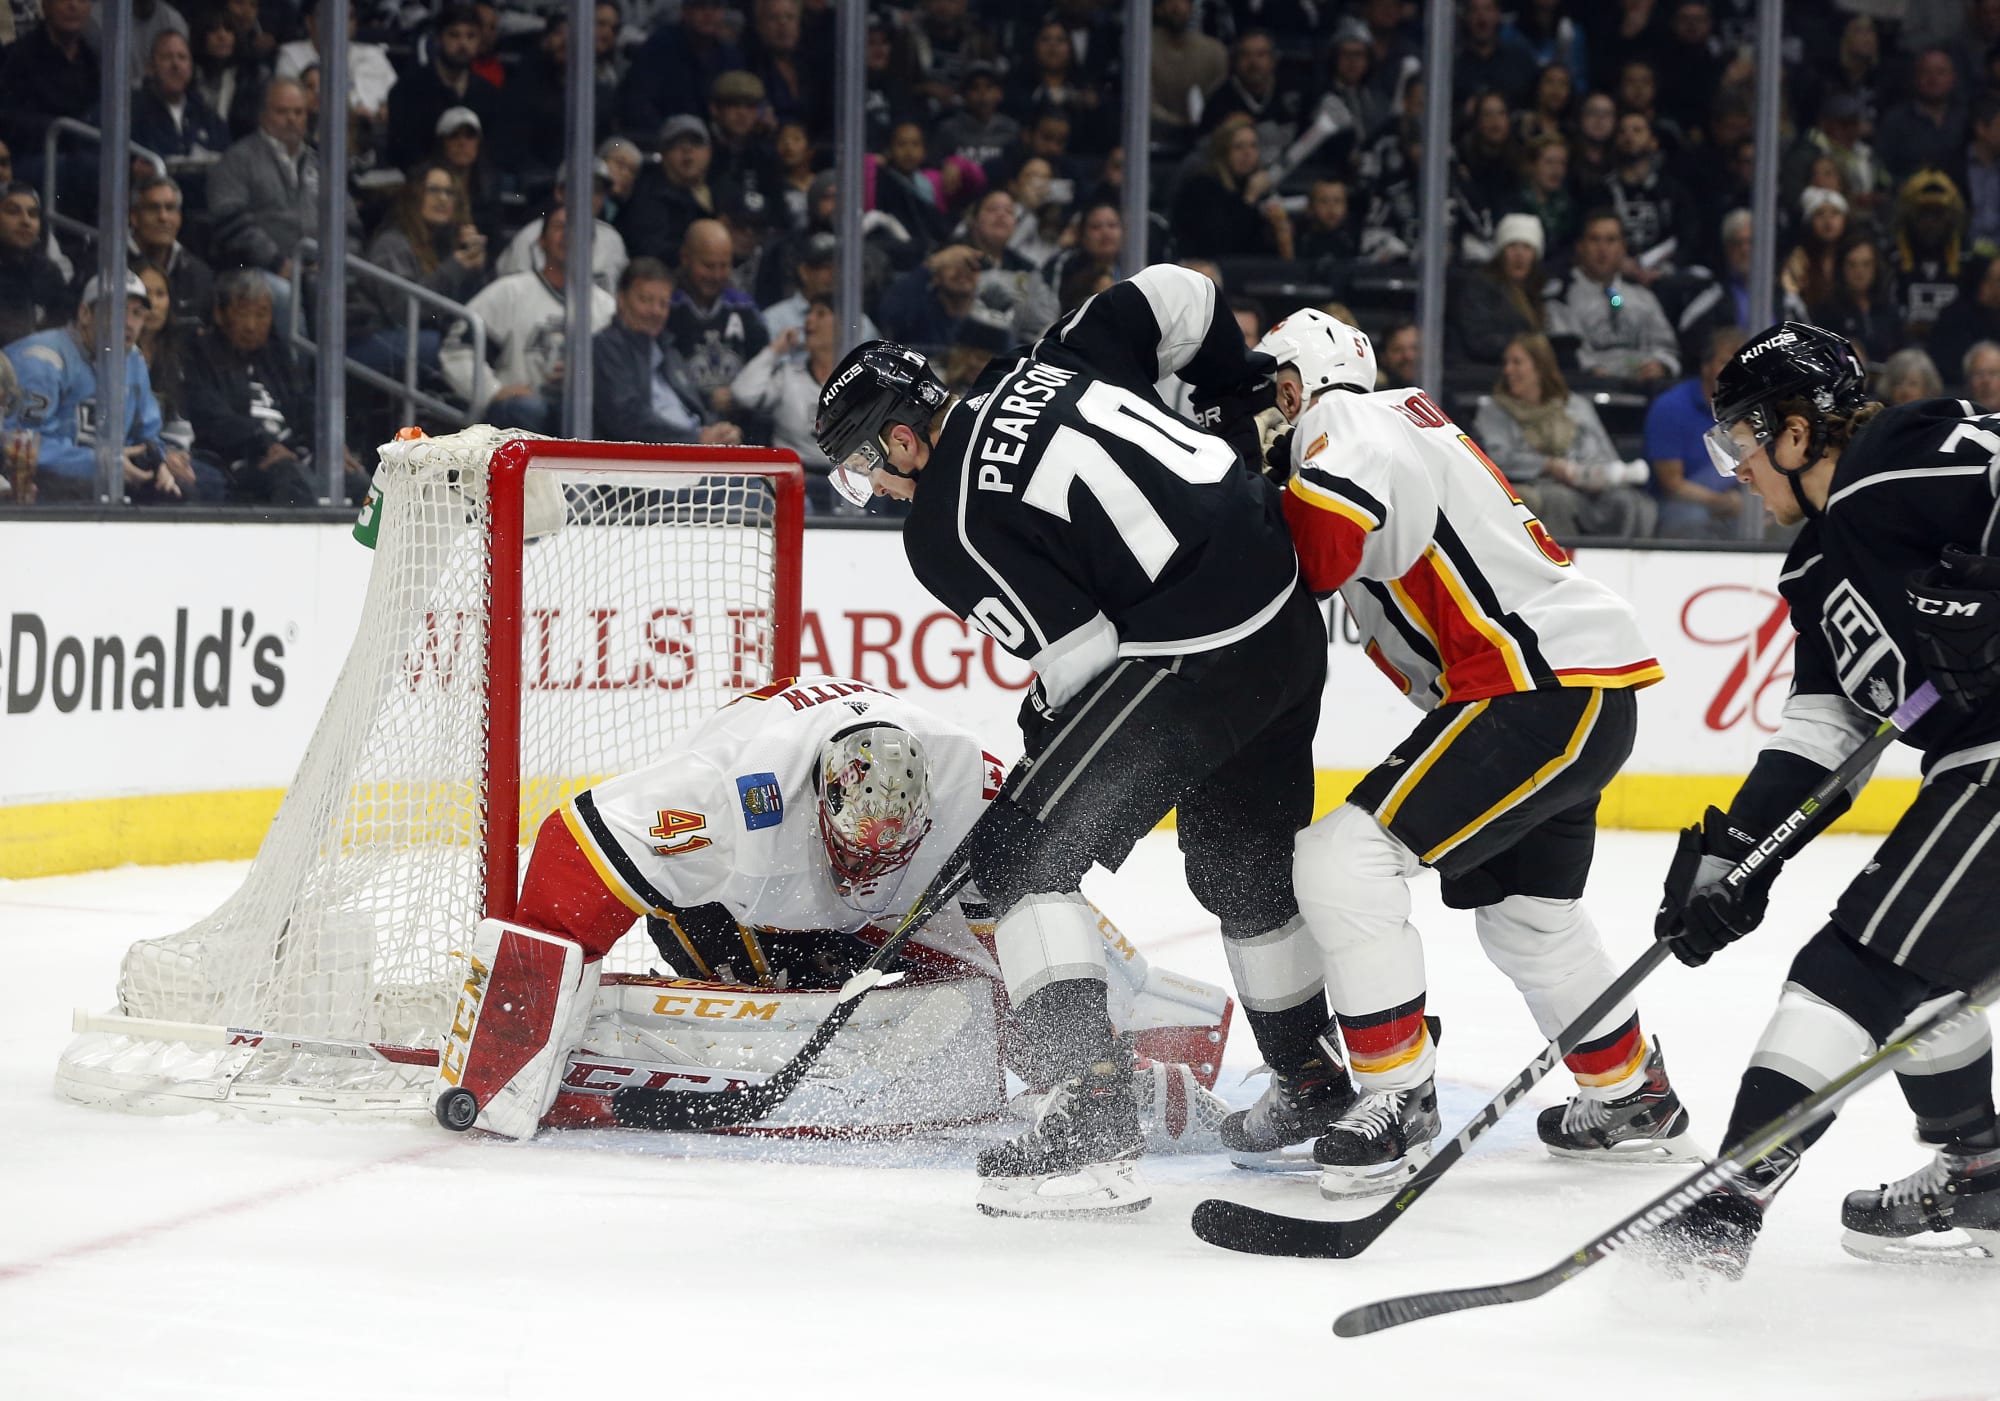 Flames have to 'flush' loss to Kings, move on in playoff push